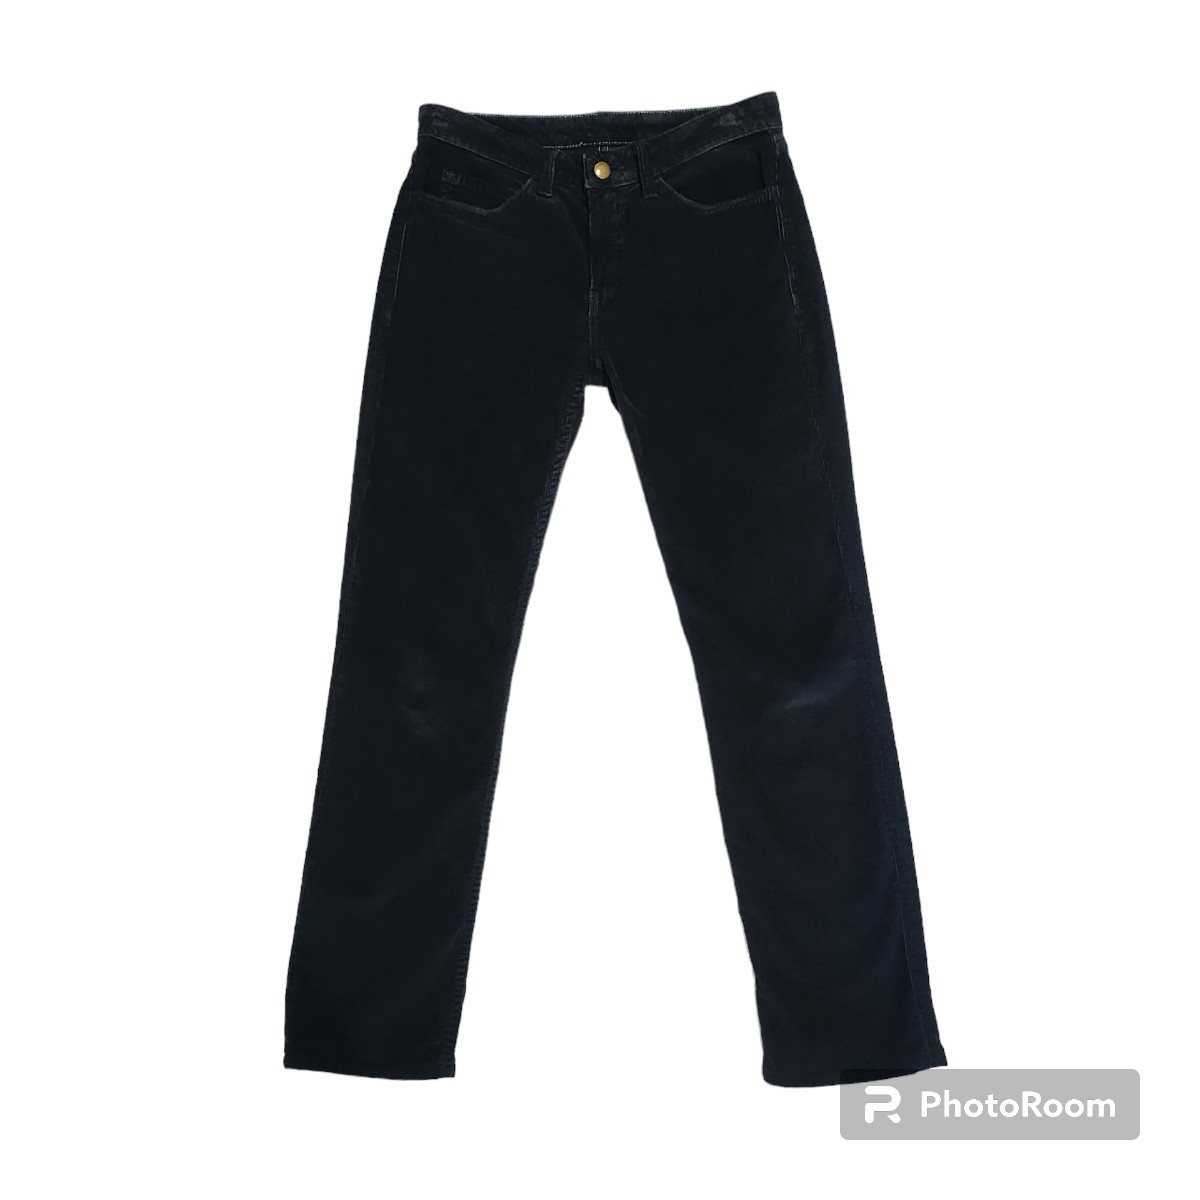 american apparel American Apparel W25 corduroy pants jeans black old clothes 